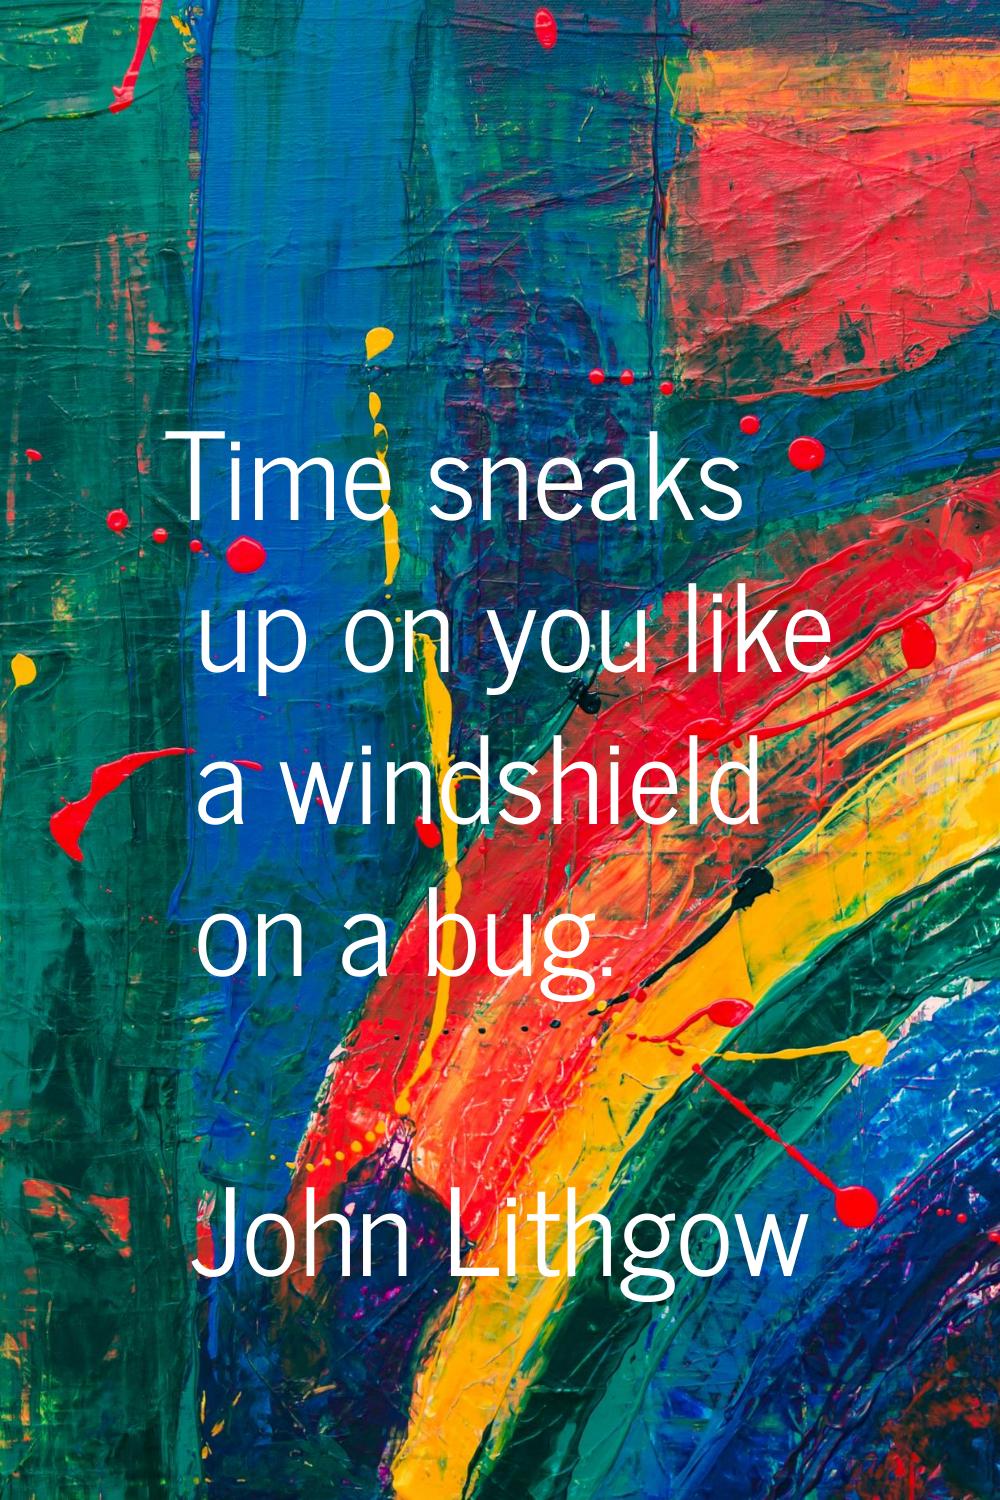 Time sneaks up on you like a windshield on a bug.